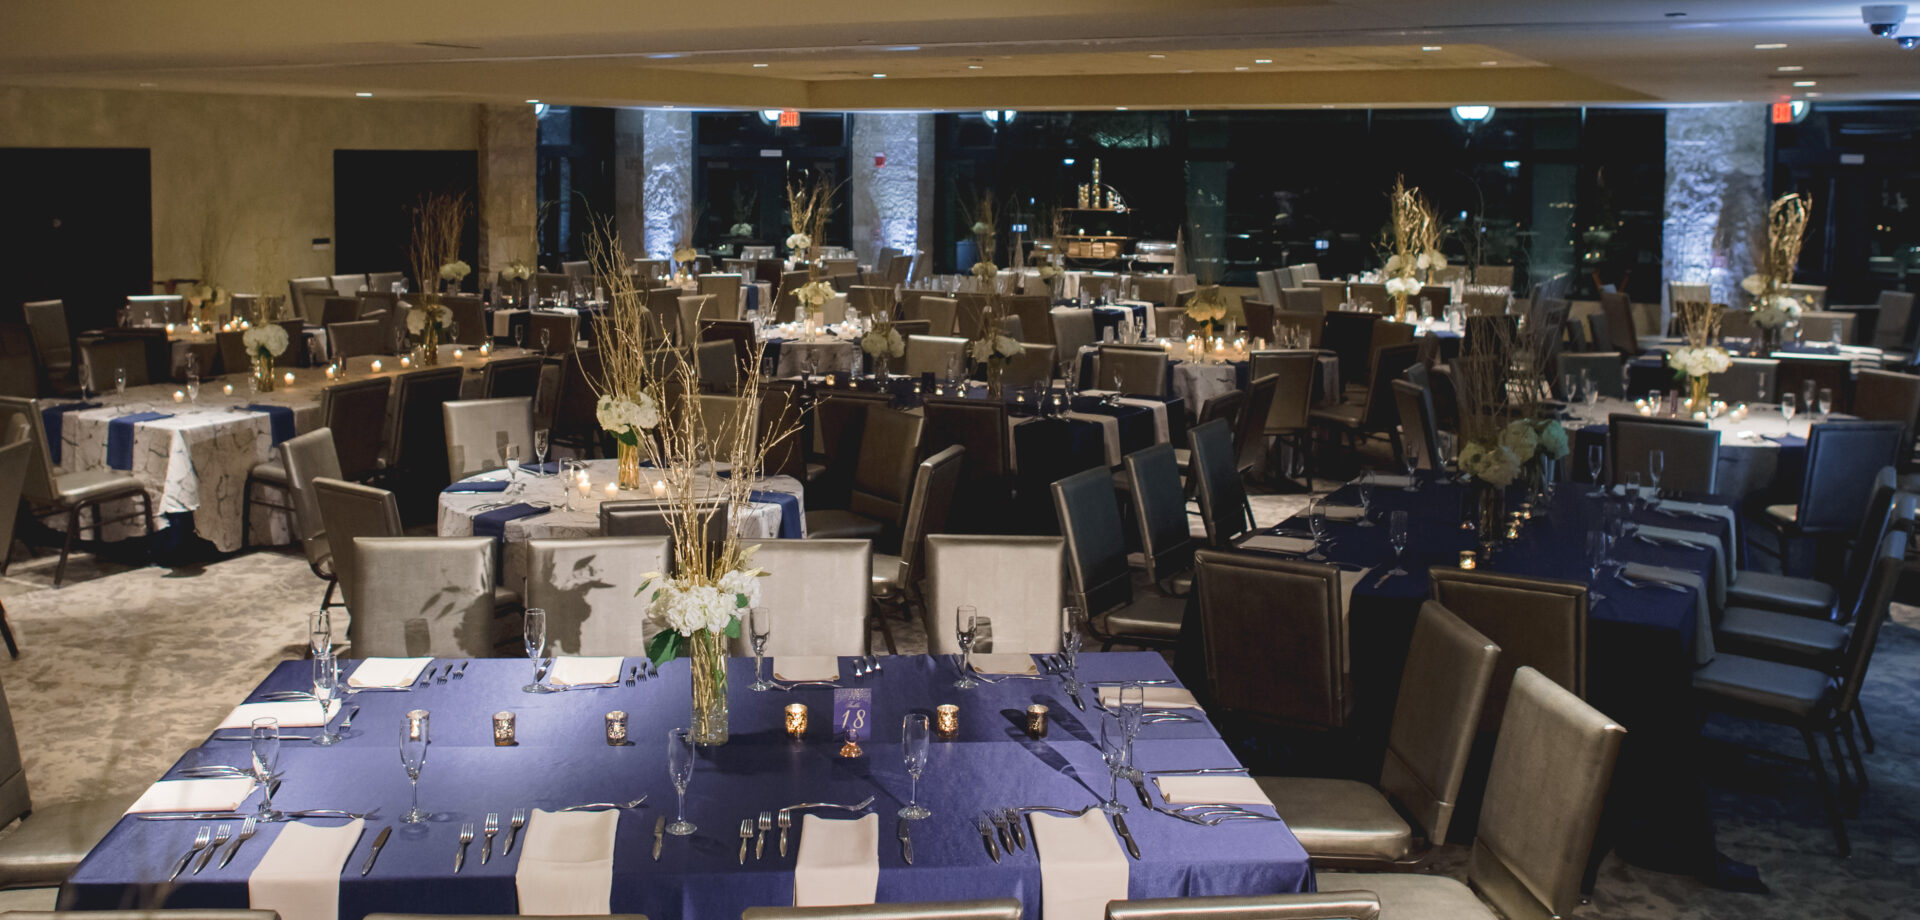 Set tables in blue theme at Miller Room